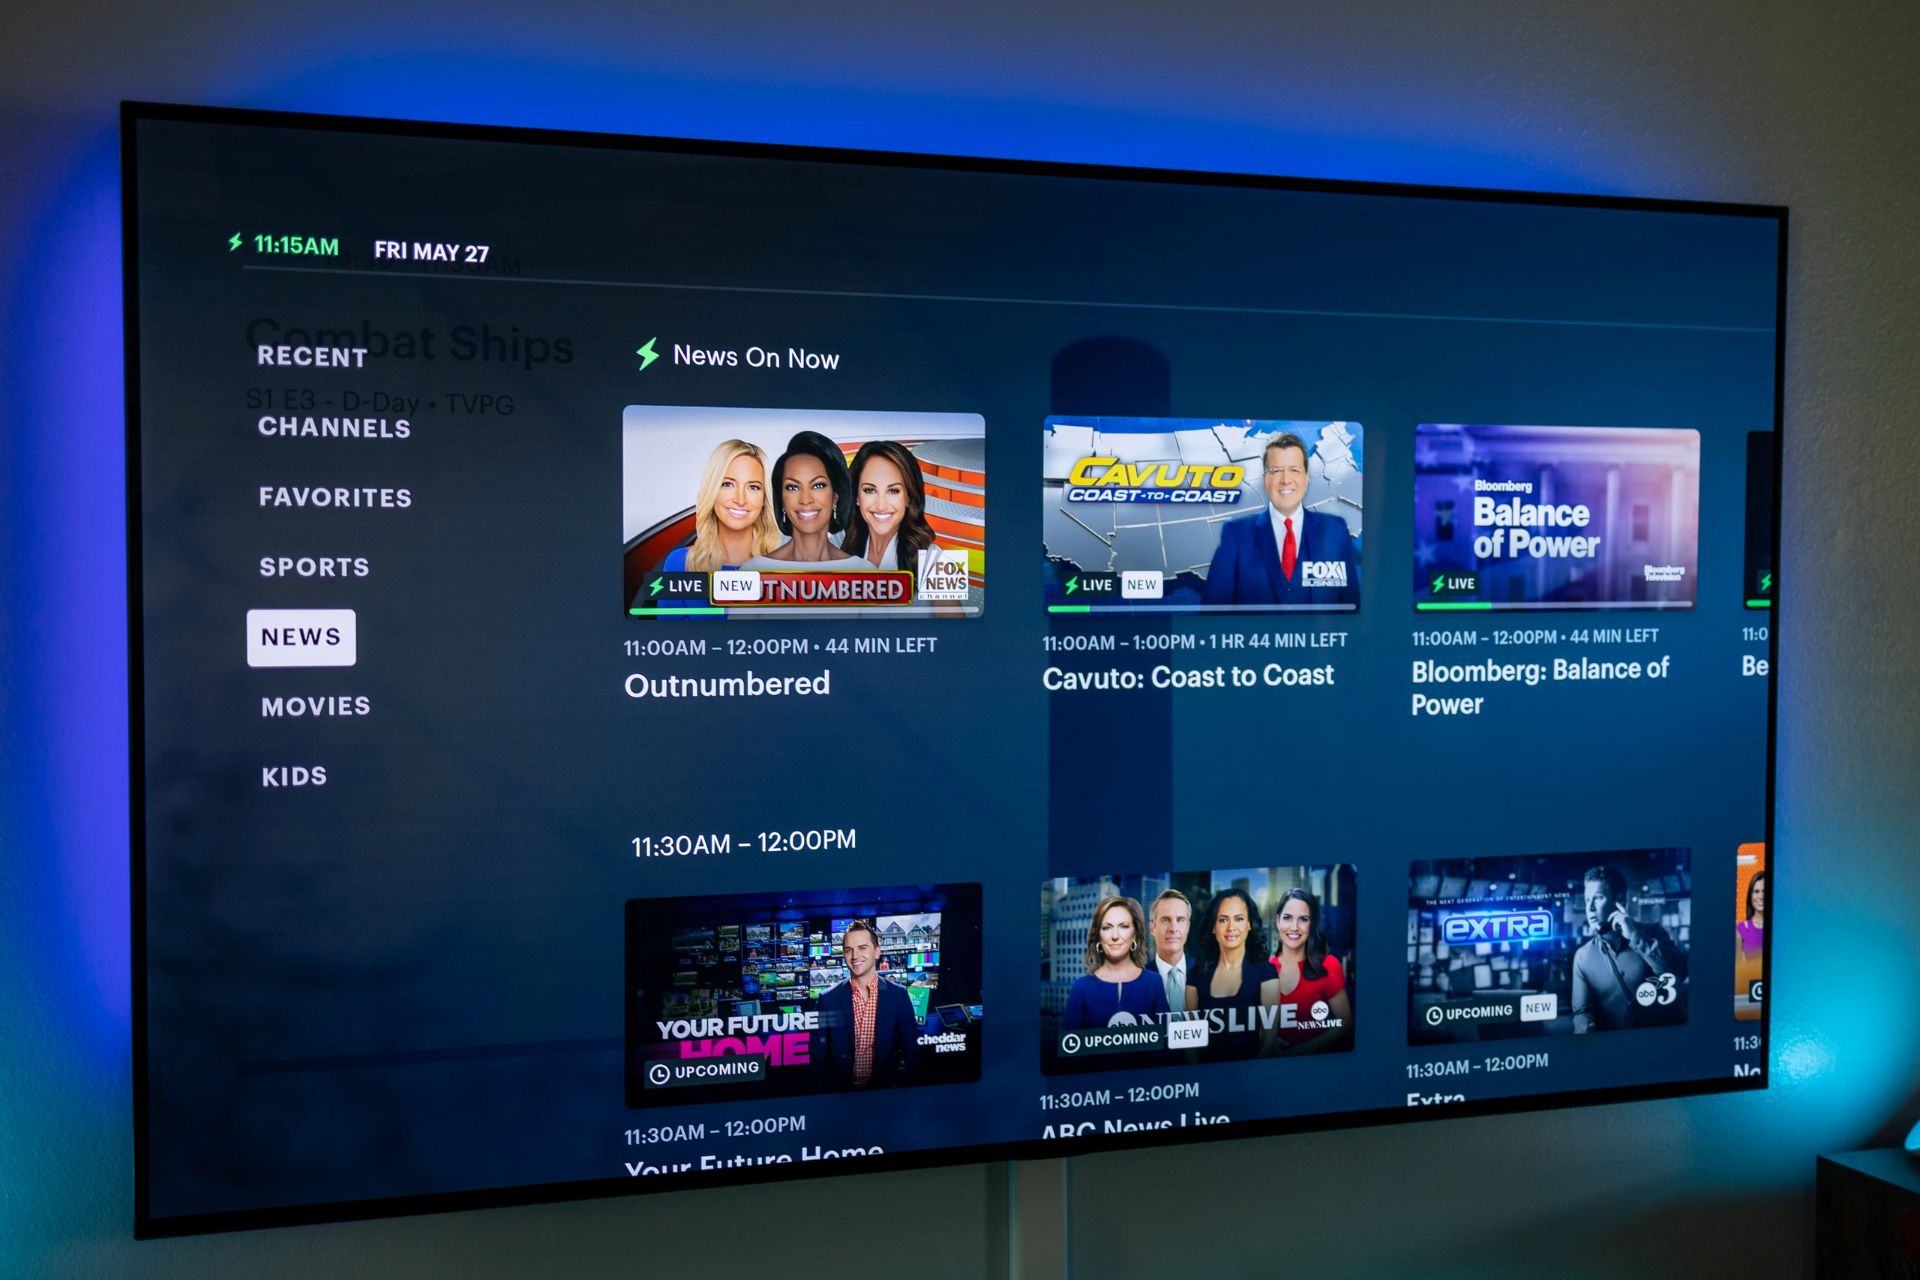 How To Watch Hulu Live On Smart TV